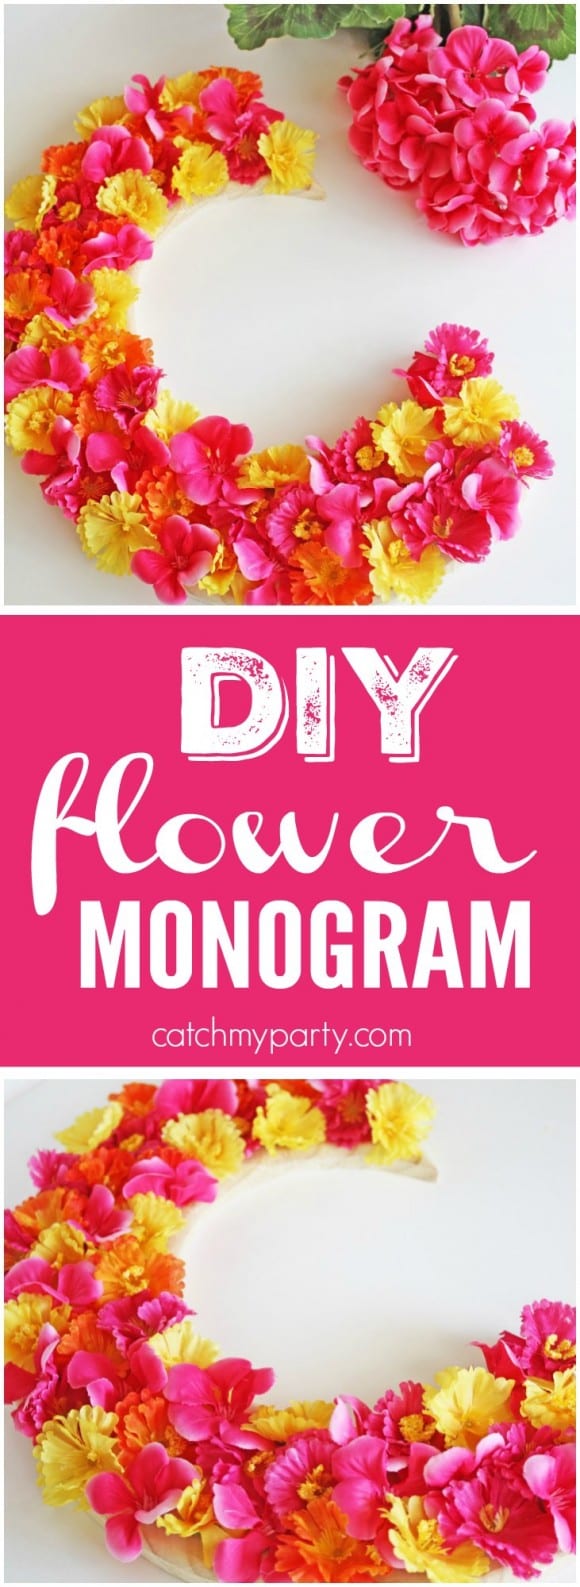 Flower Monogram Letter for Spring! Great party or room decor! | CatchMyParty.com